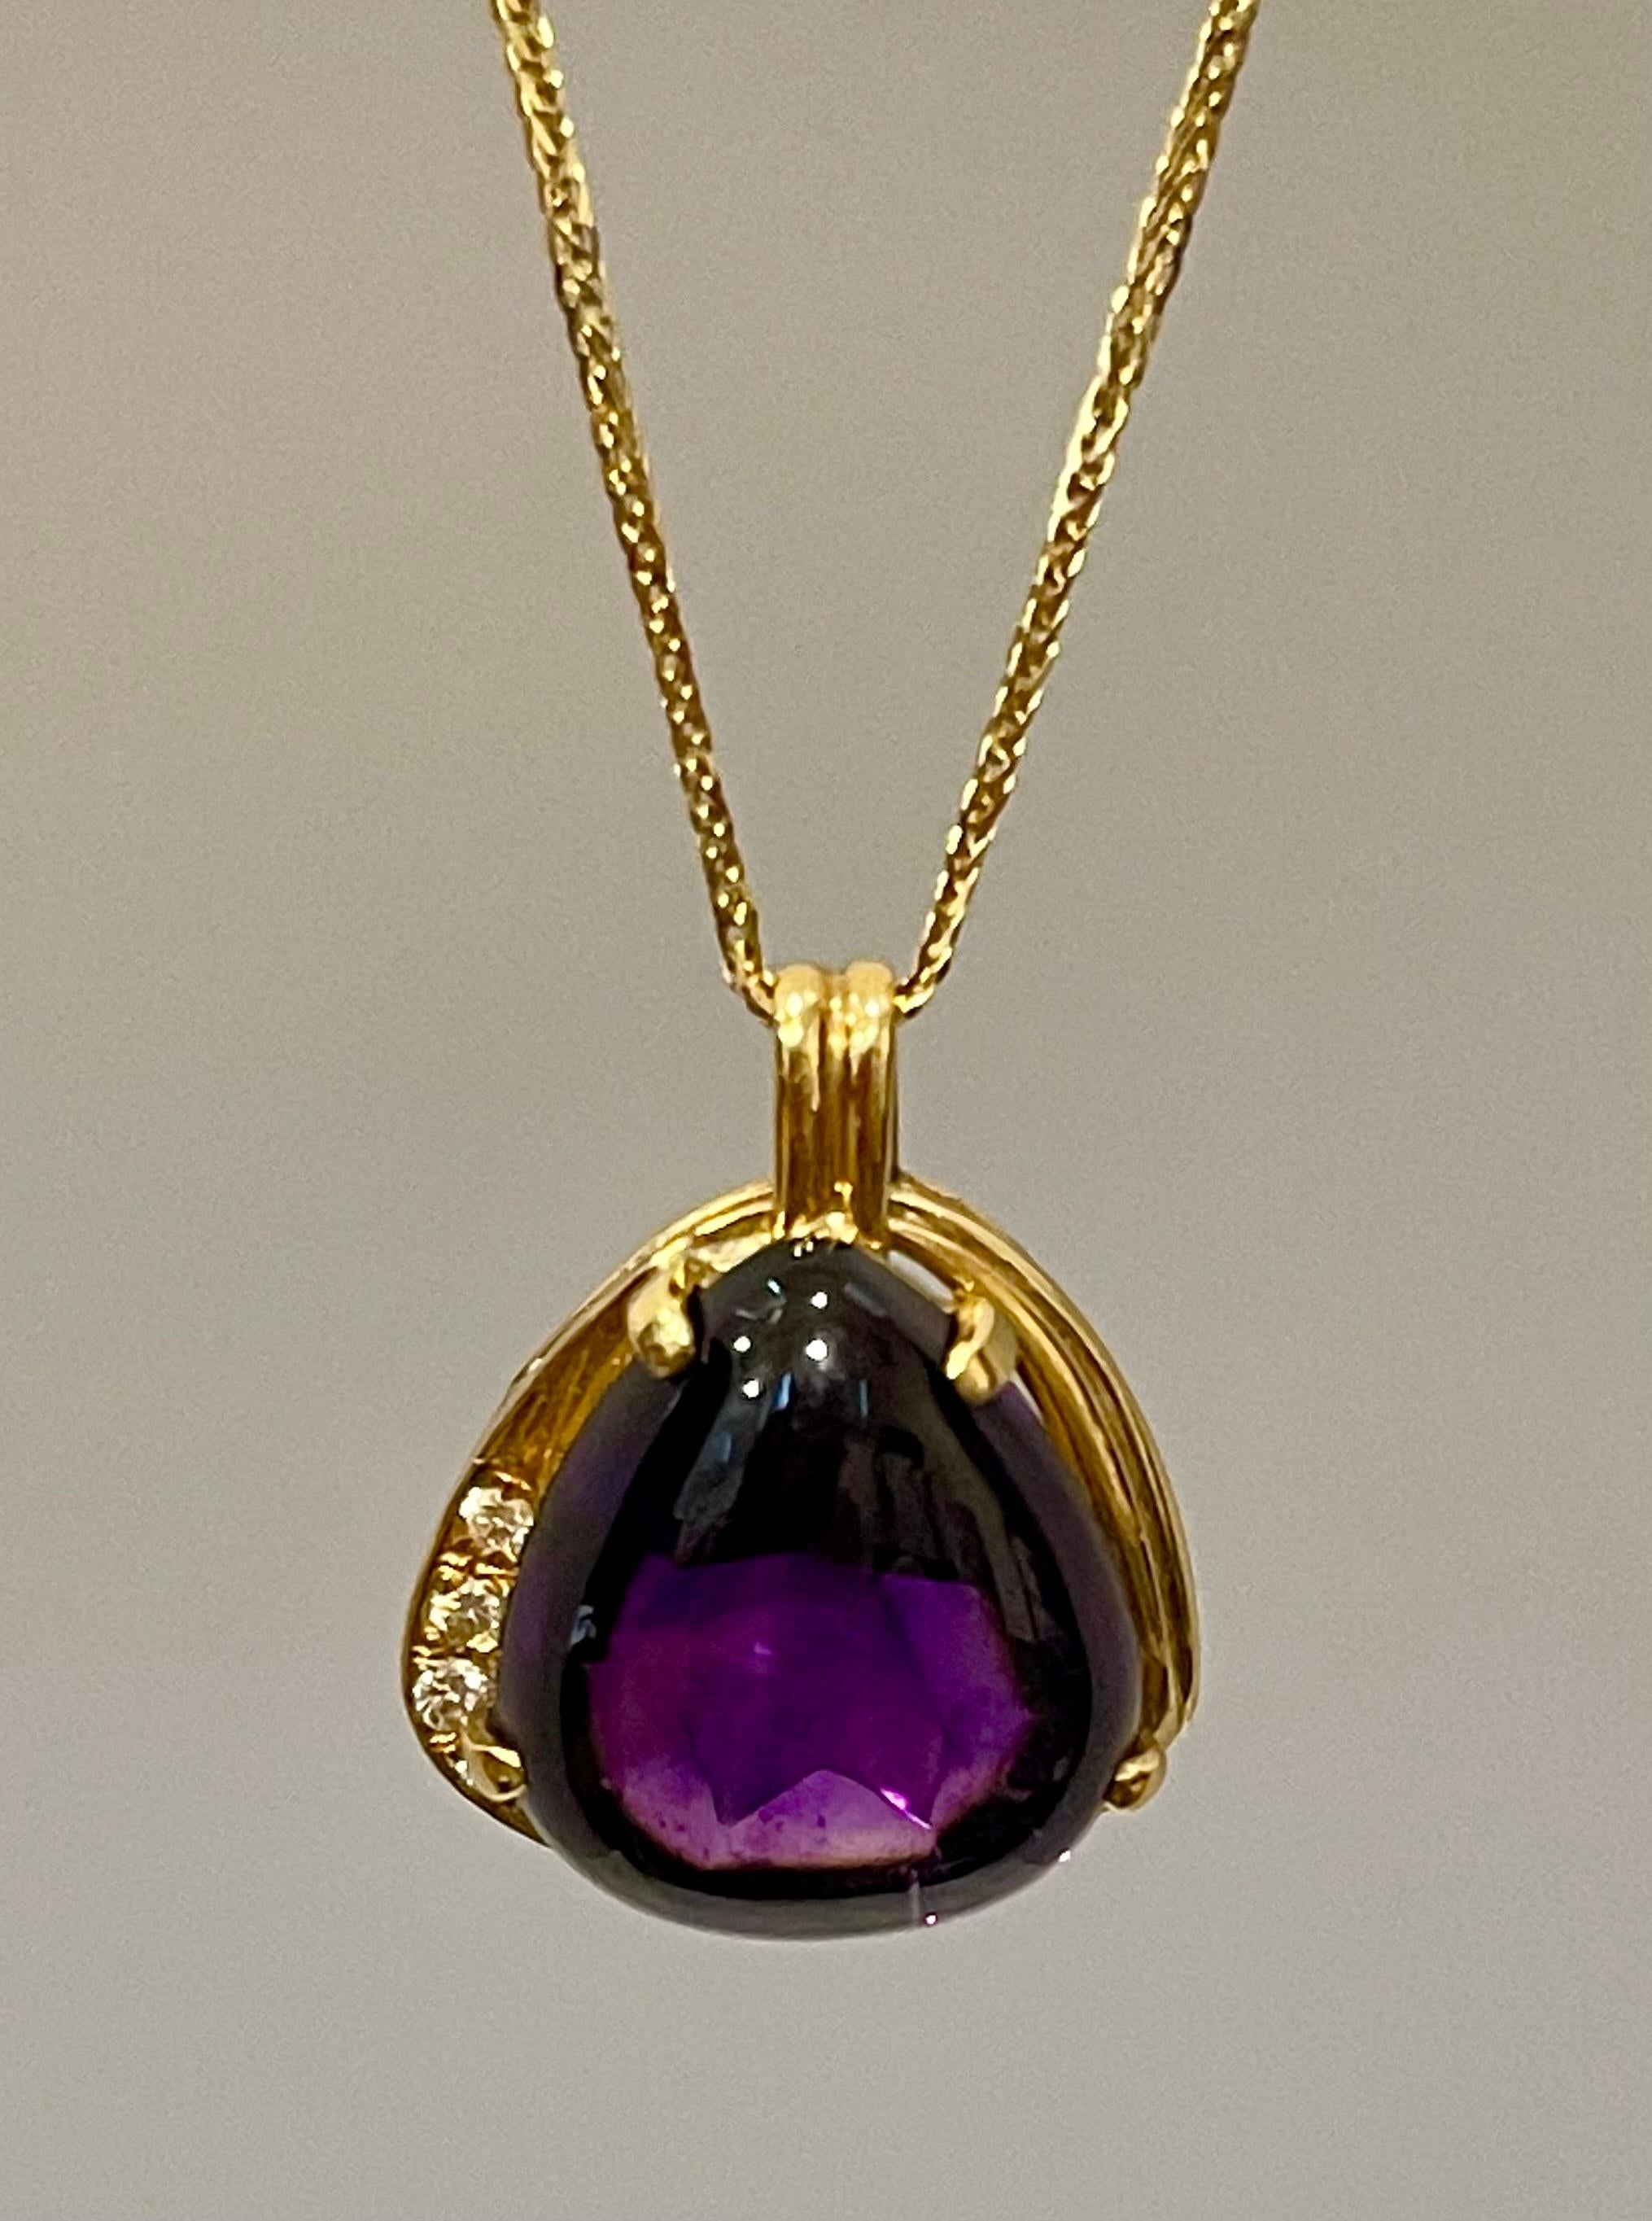 10 Carat Tear Drop Amethyst and Diamonds Pendent Necklace 18 Karat Yellow Gold For Sale 11